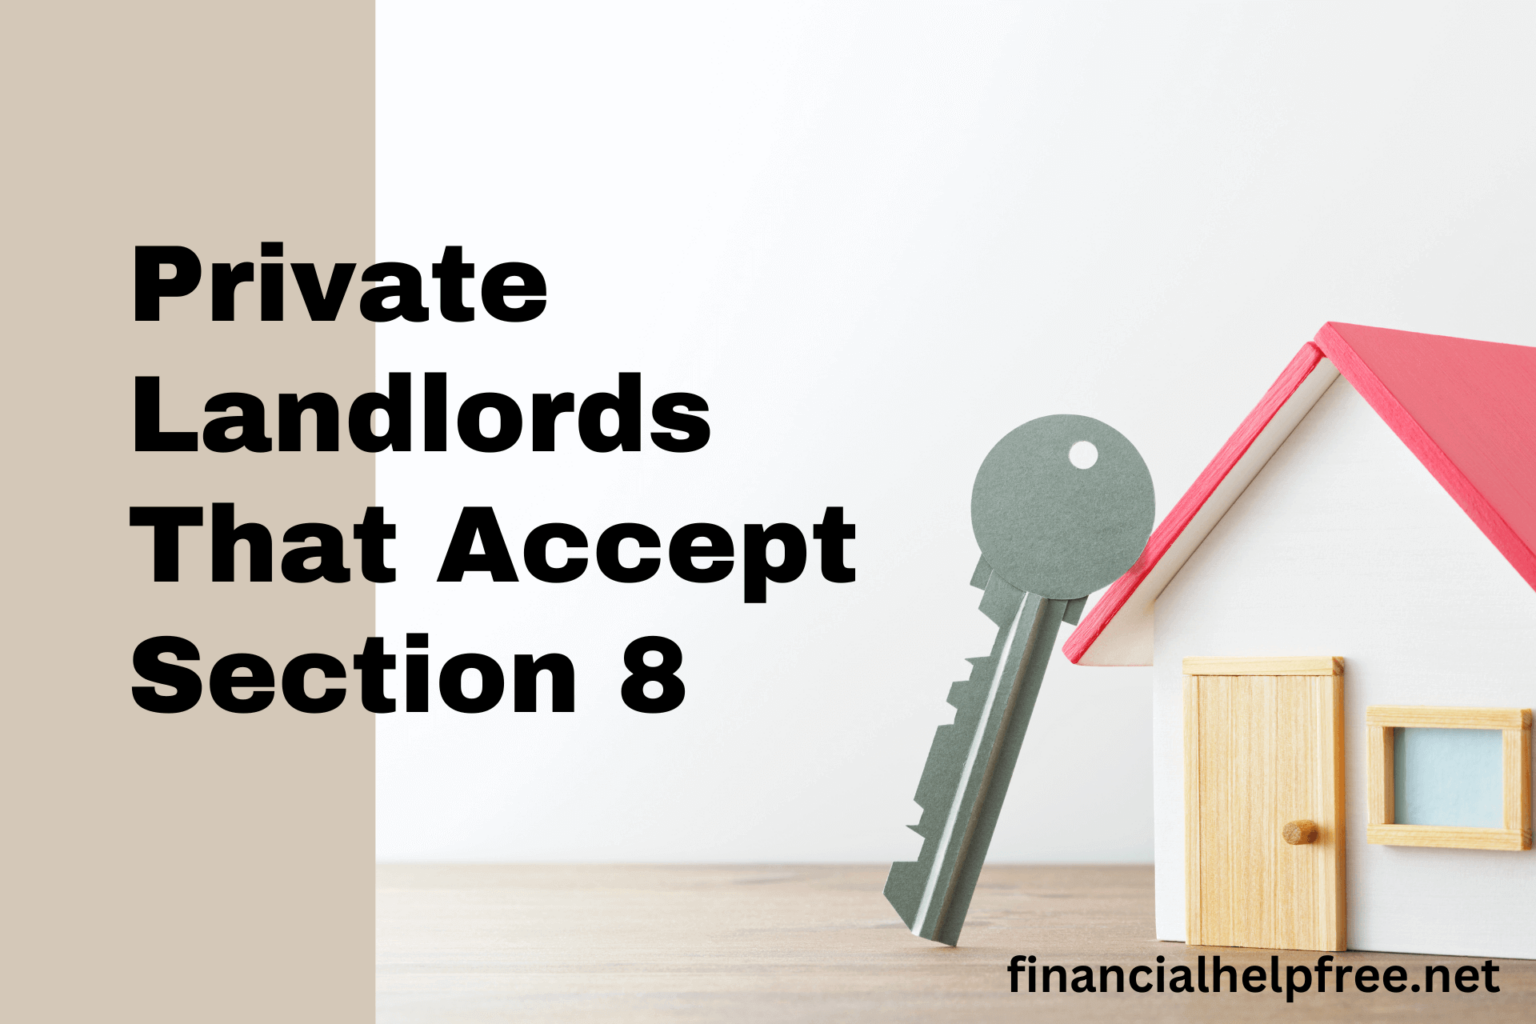 How To Find Private Landlords That Accept Section 8 [Full Guide]